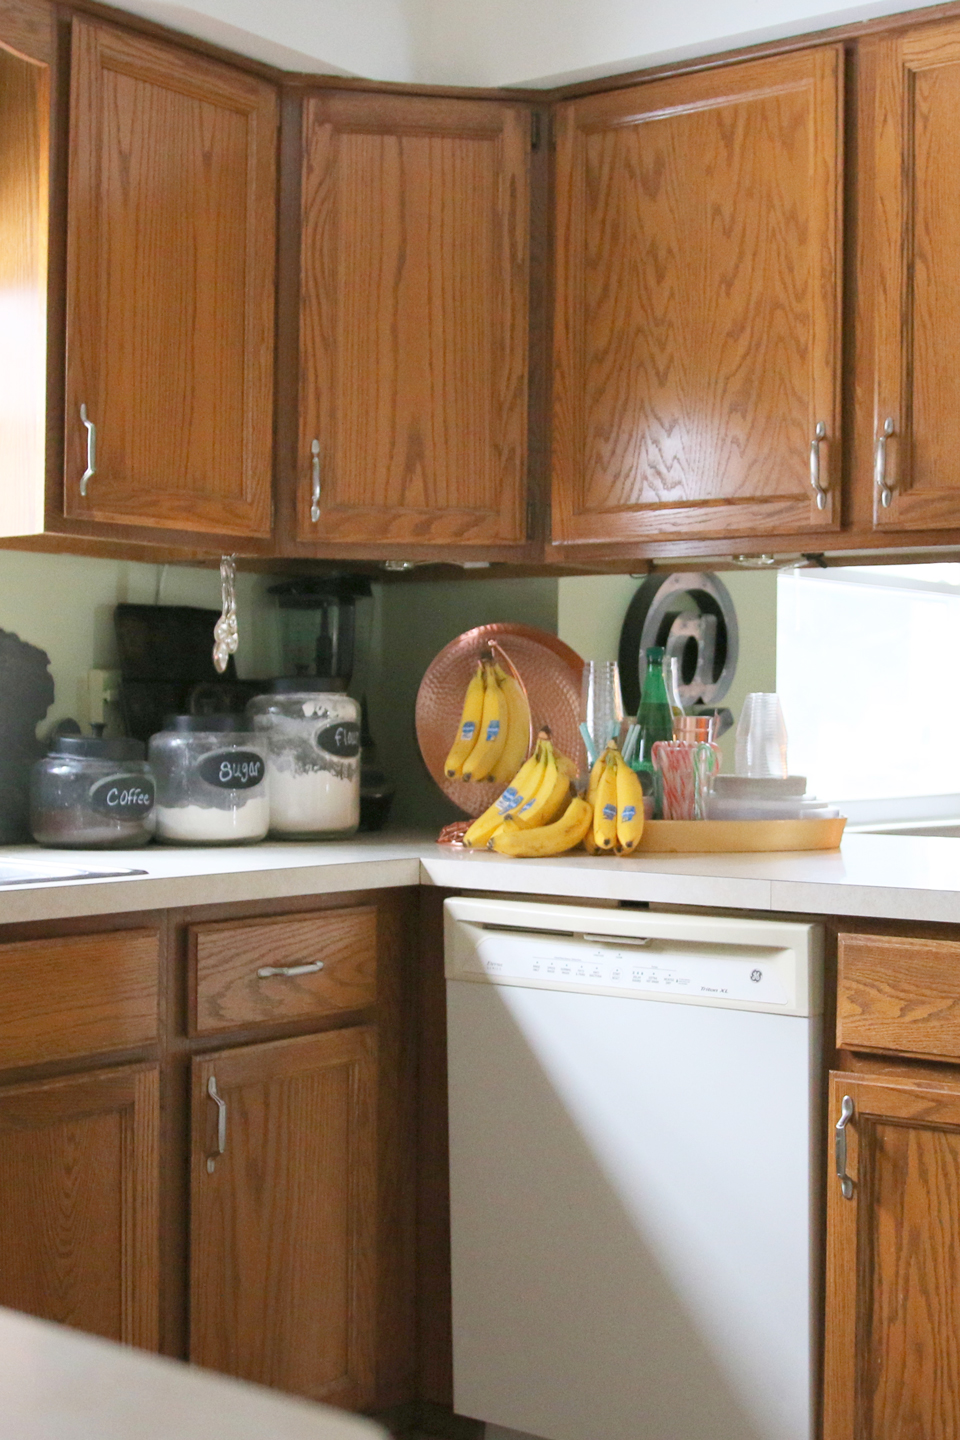 A before image of a kitchen with wood cabinets